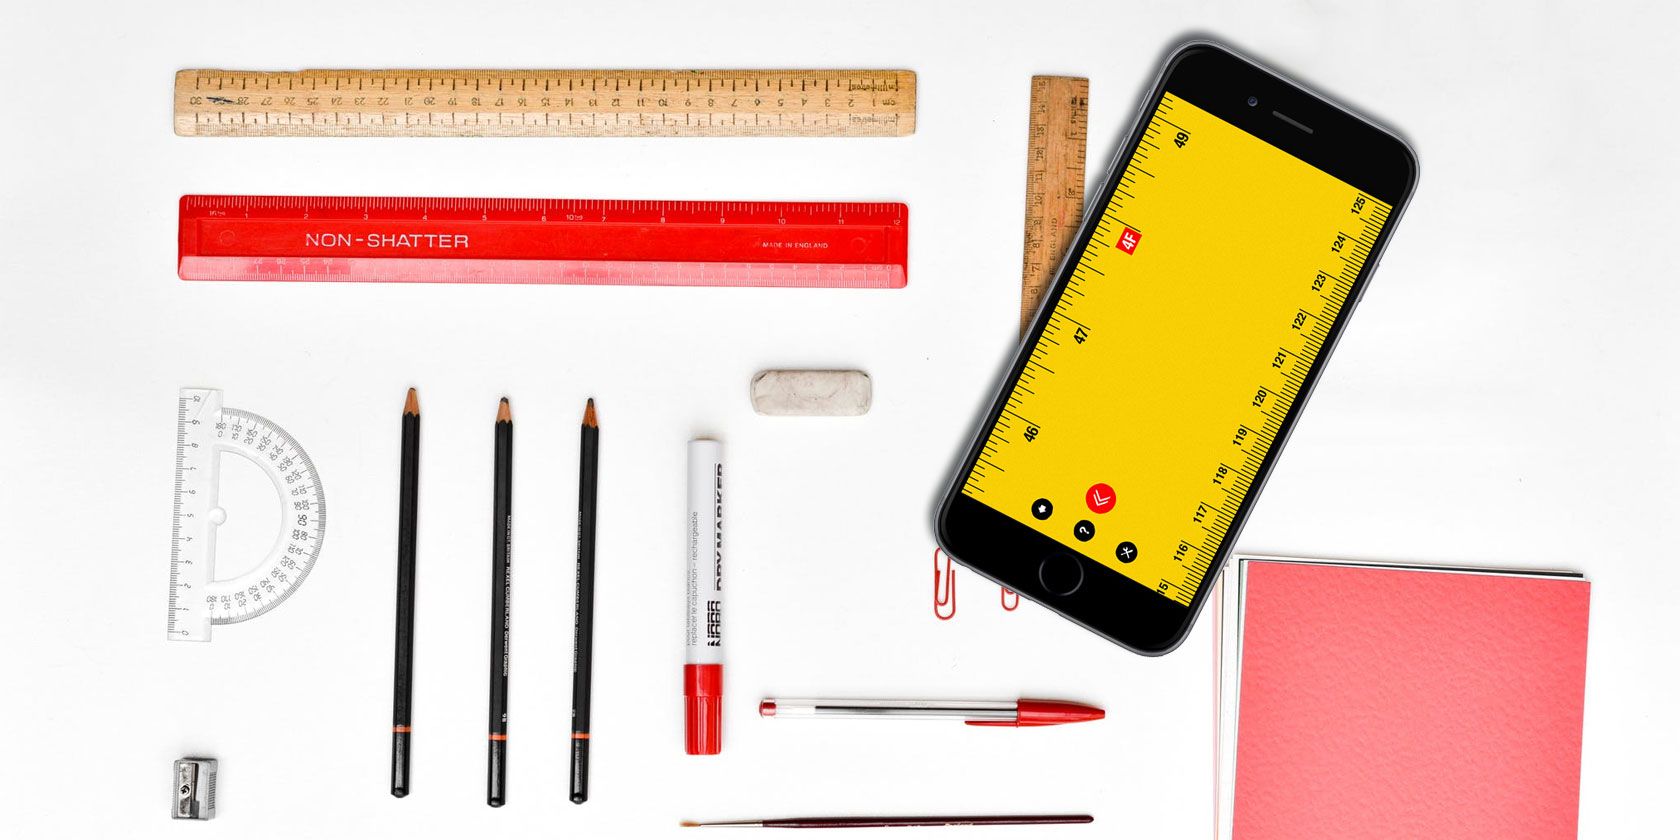 The 10 Best Tools for Your iPhone: Ruler, Level, and Distance Measurement